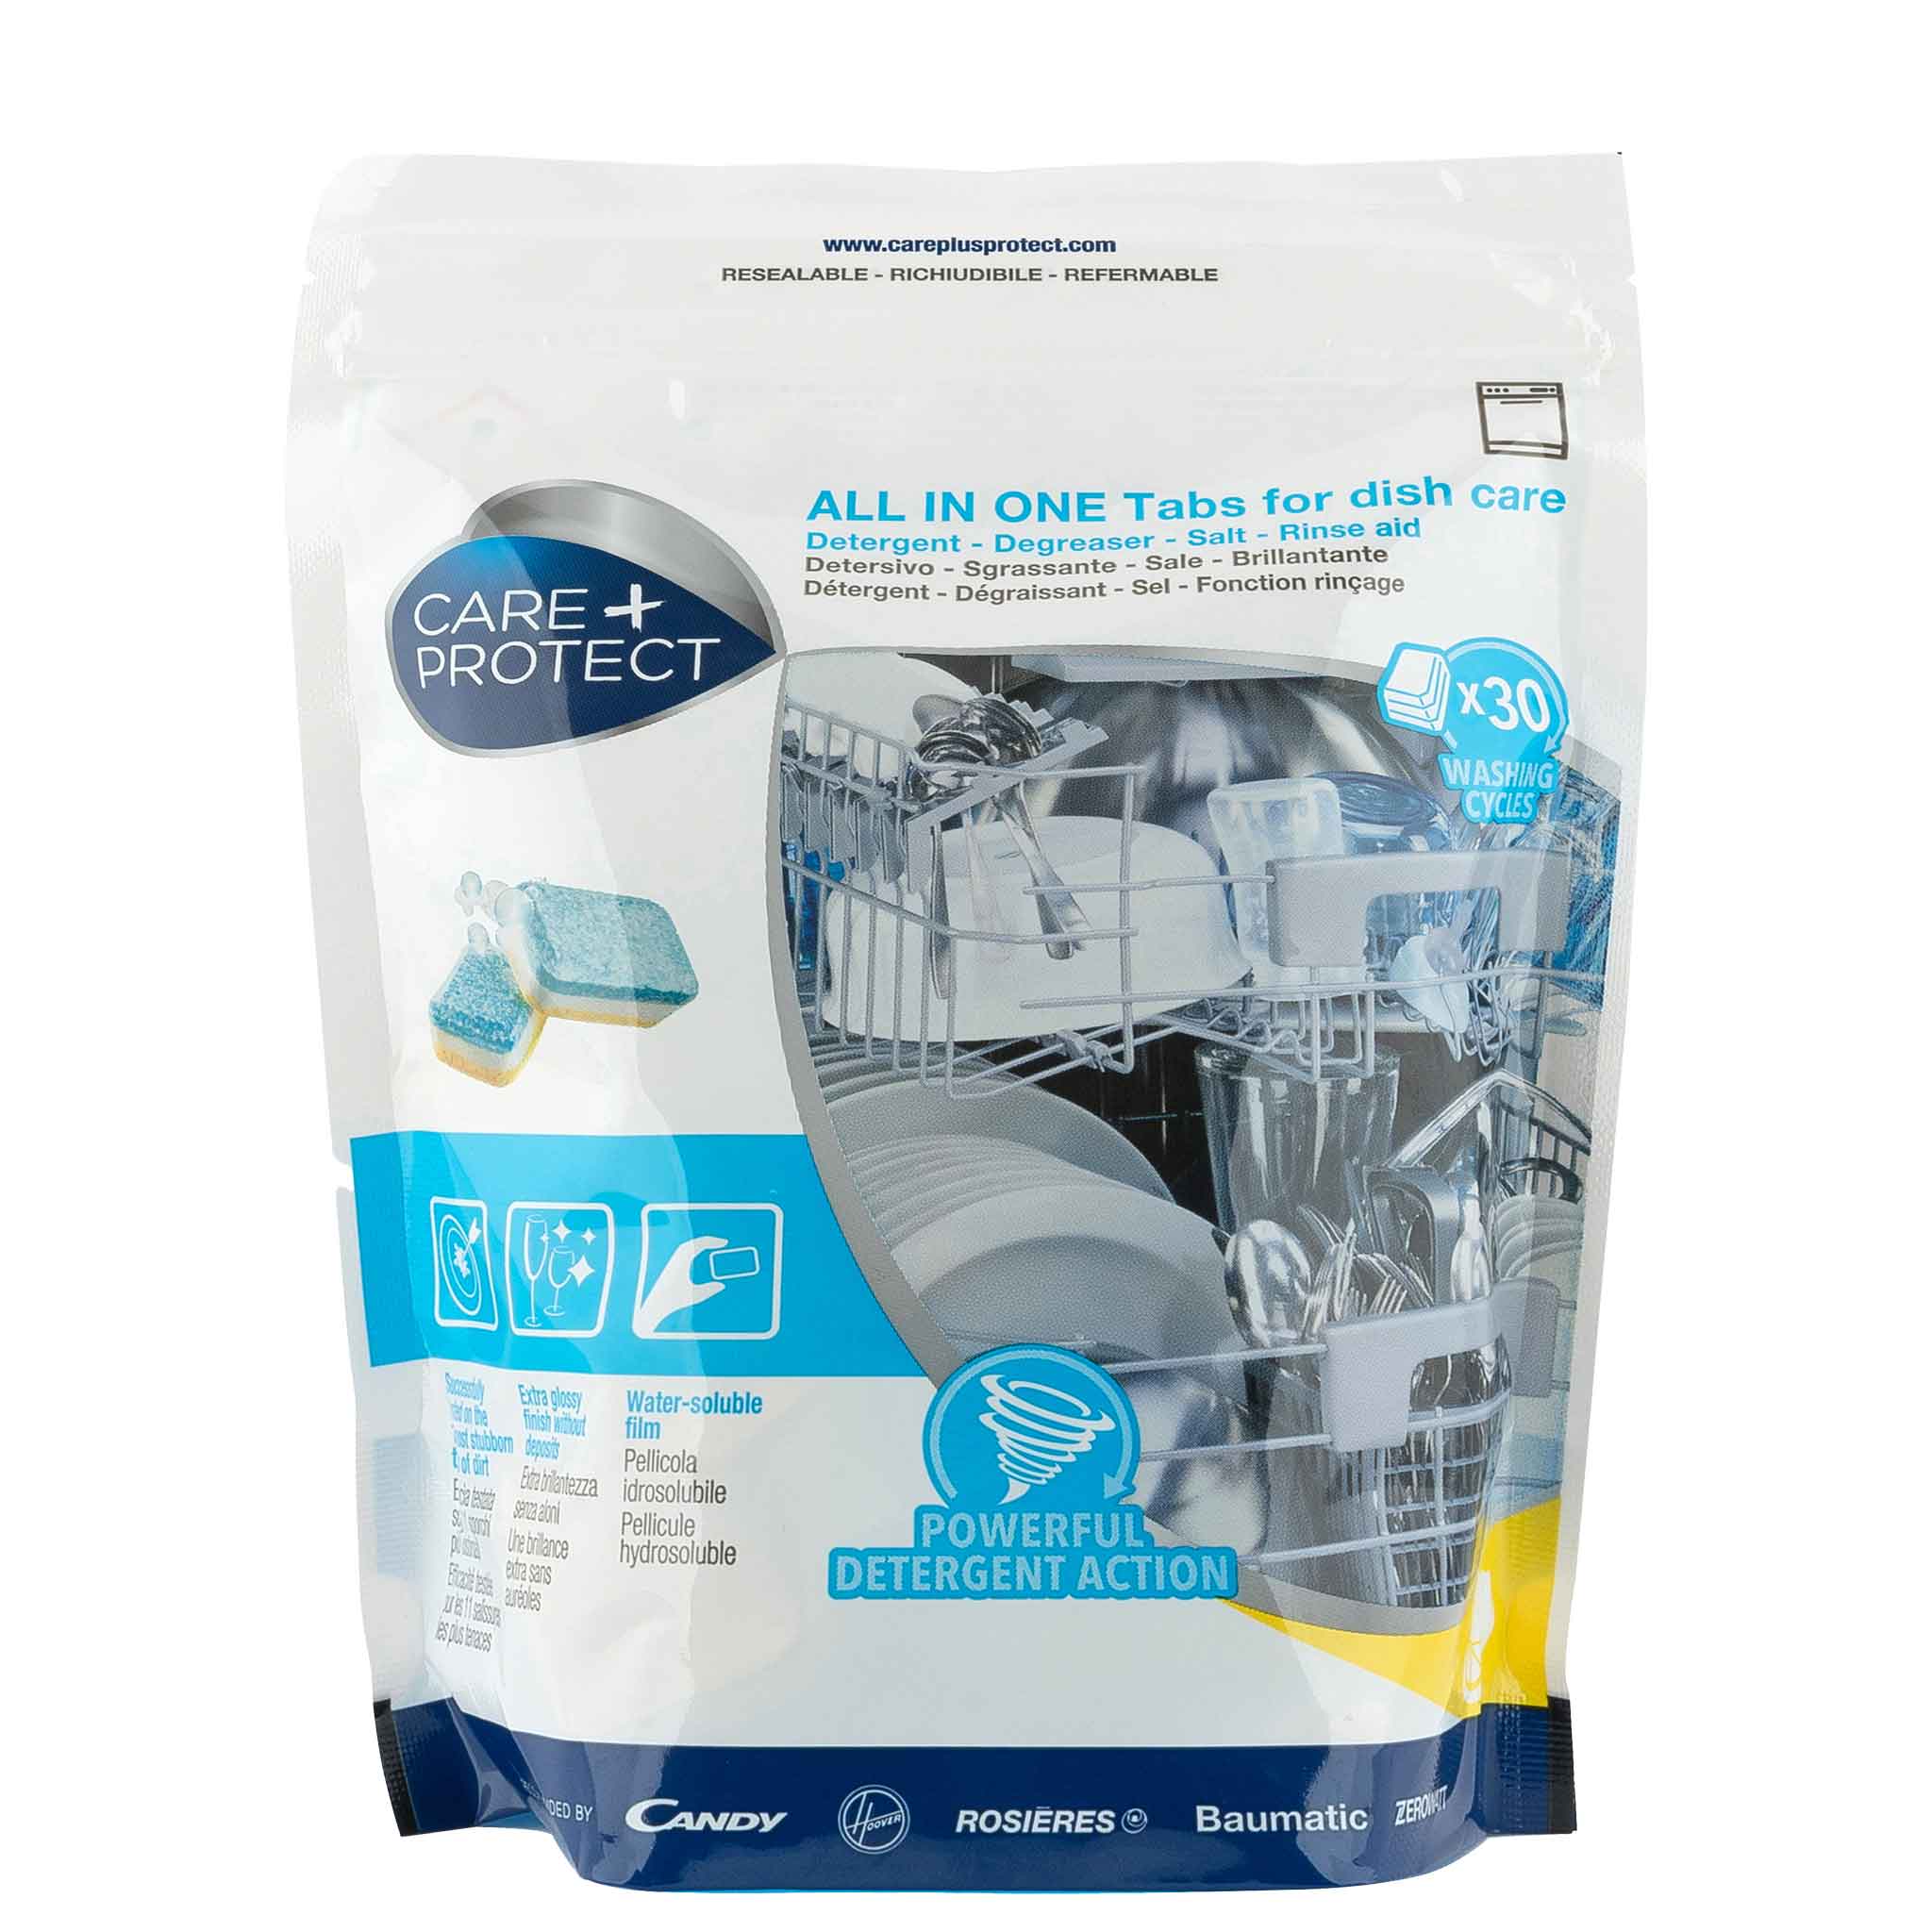 All-in-One Detergent Tablets for Dishwashers